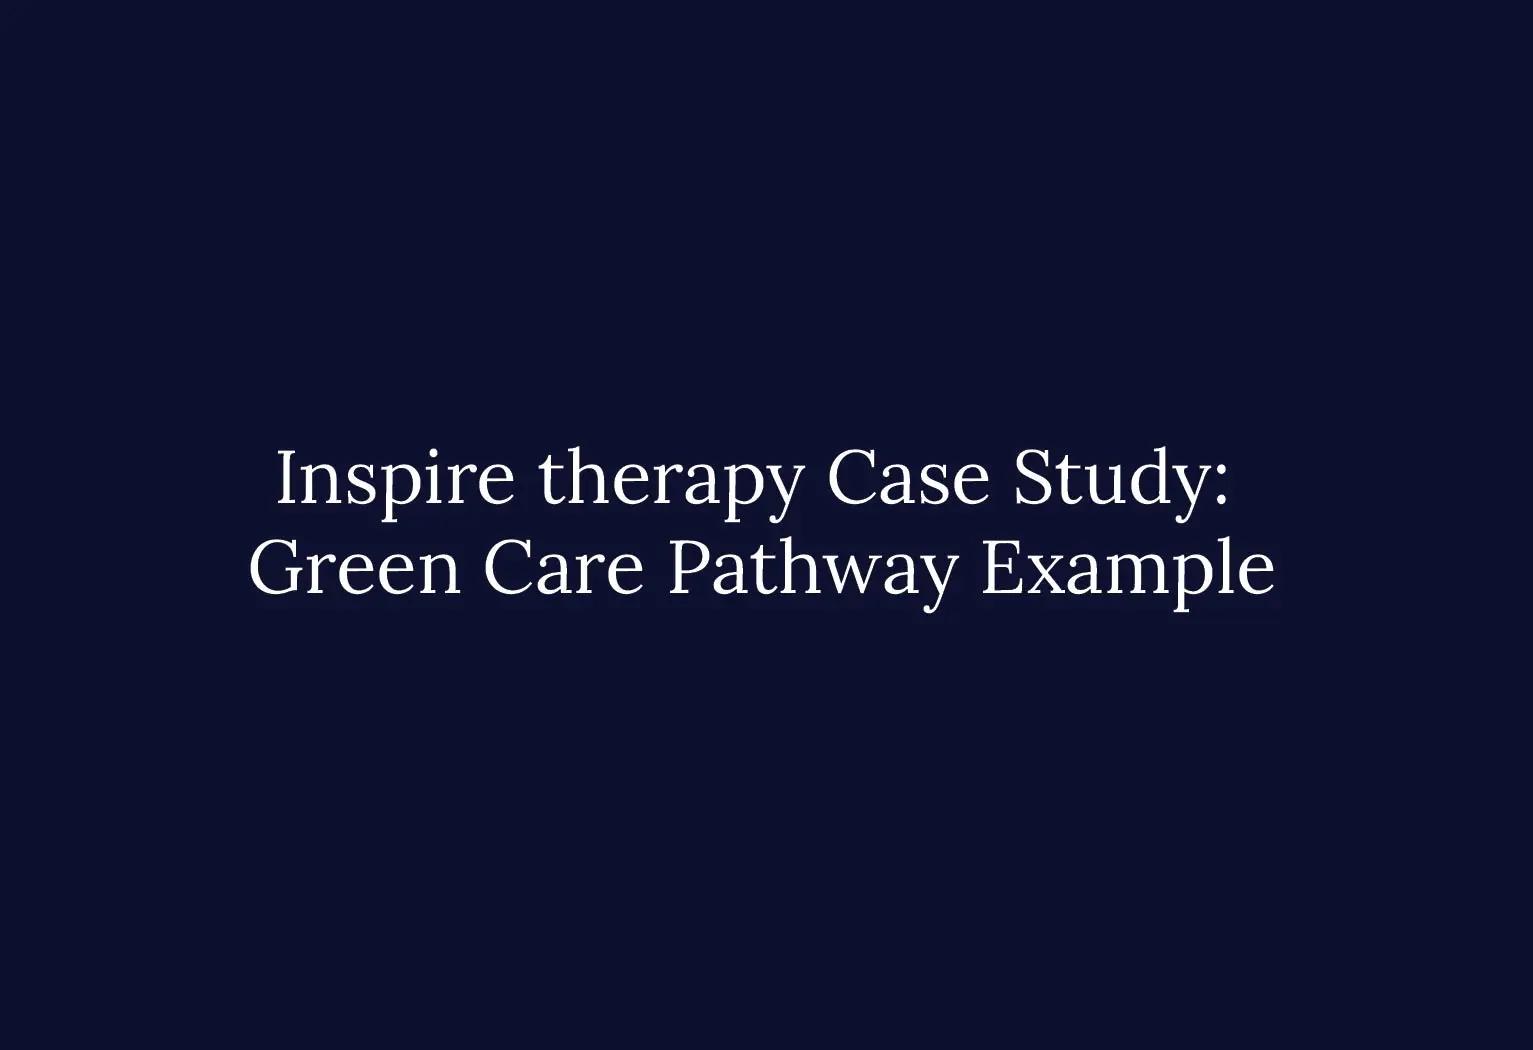 Inspire therapy Case Study- Green Care Pathway Example